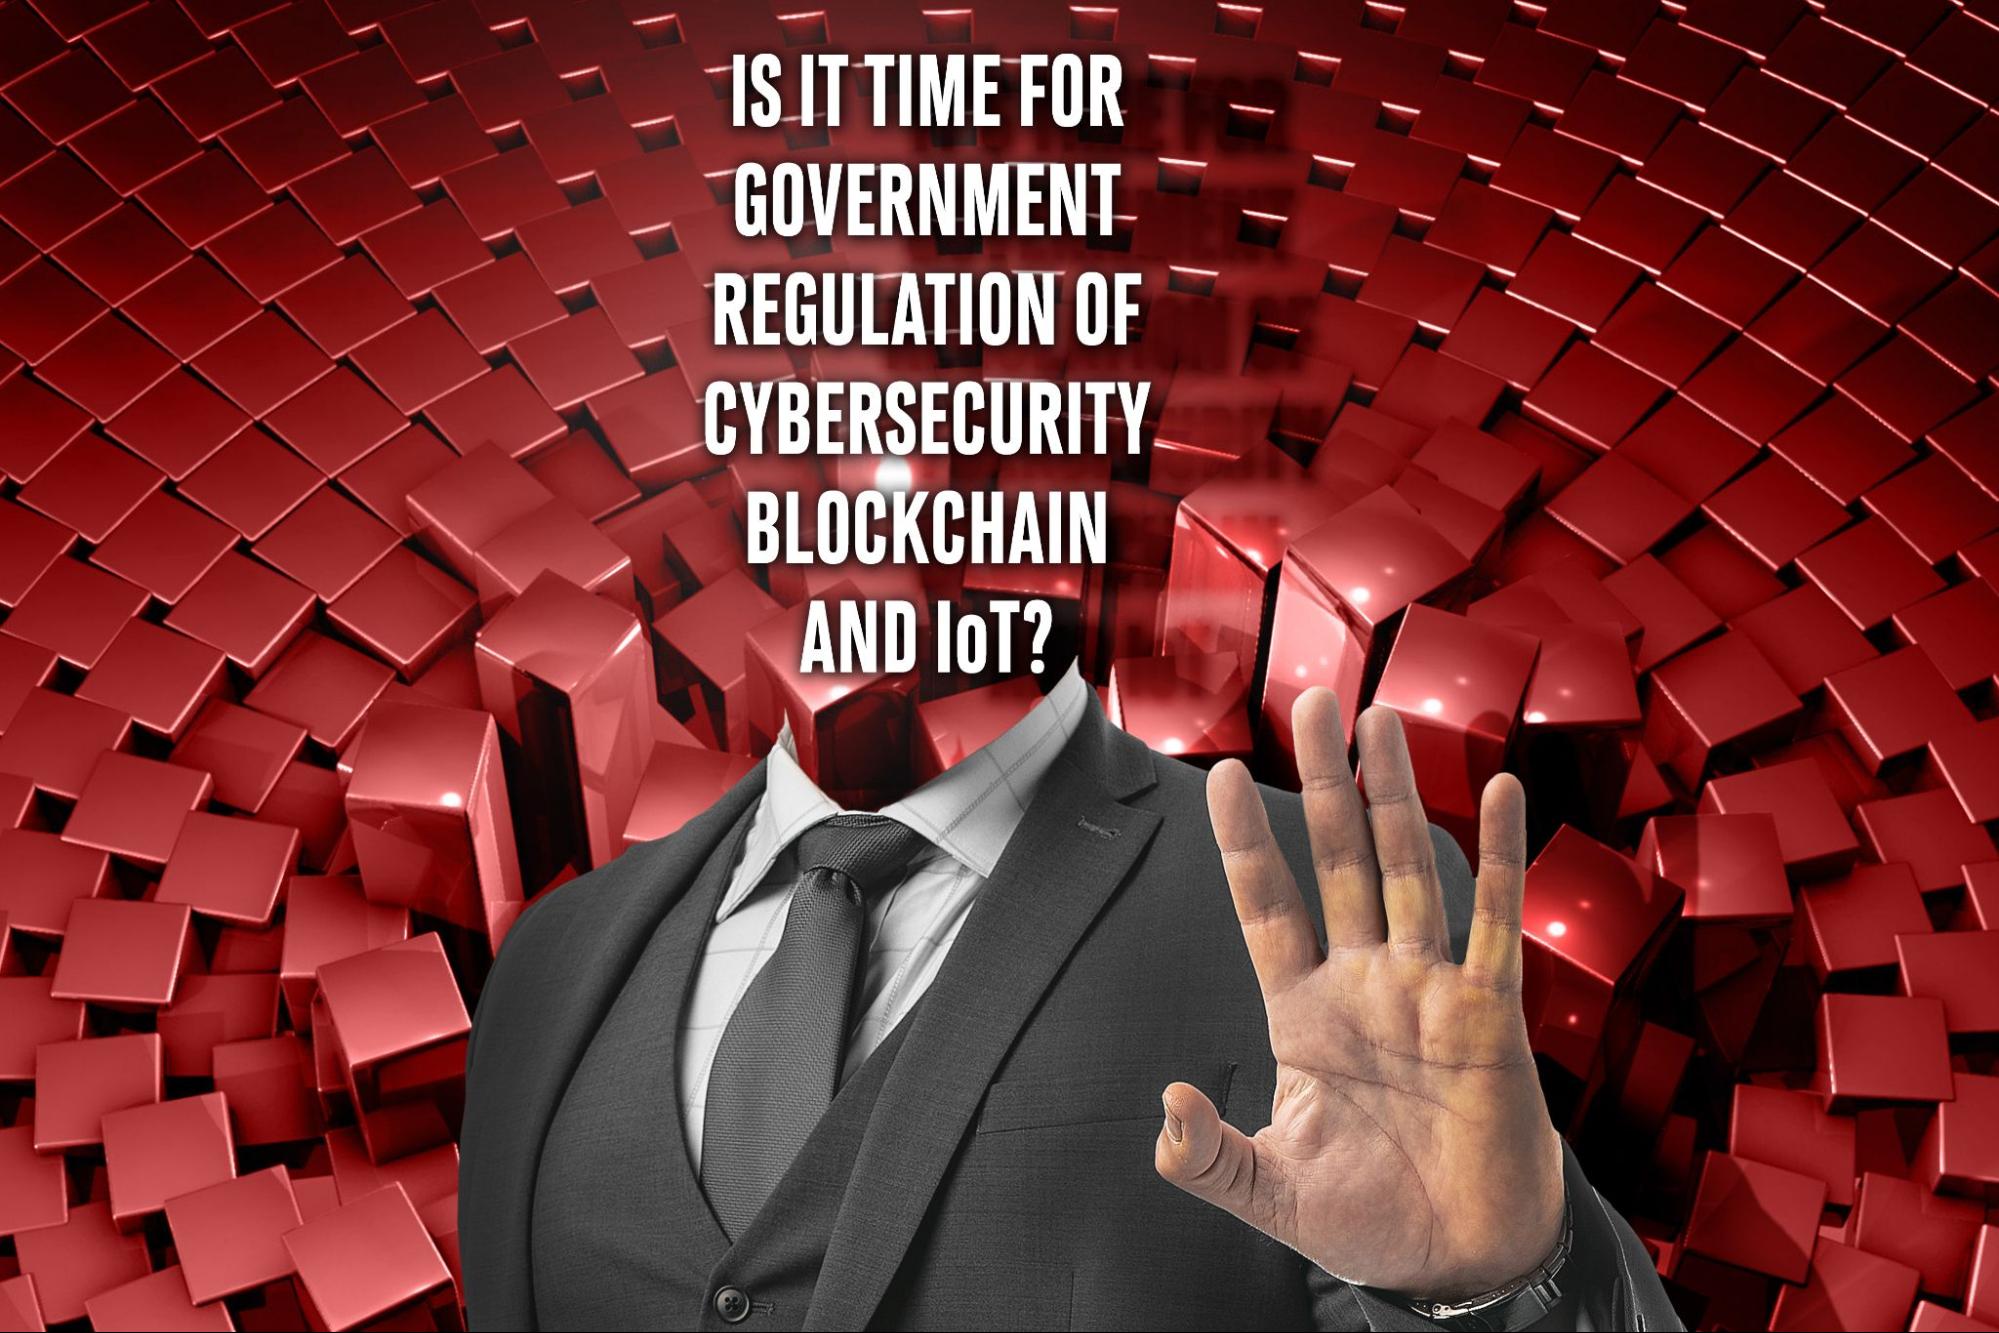 Regulations, Internet of Things, Cybersecurity, Blockchain